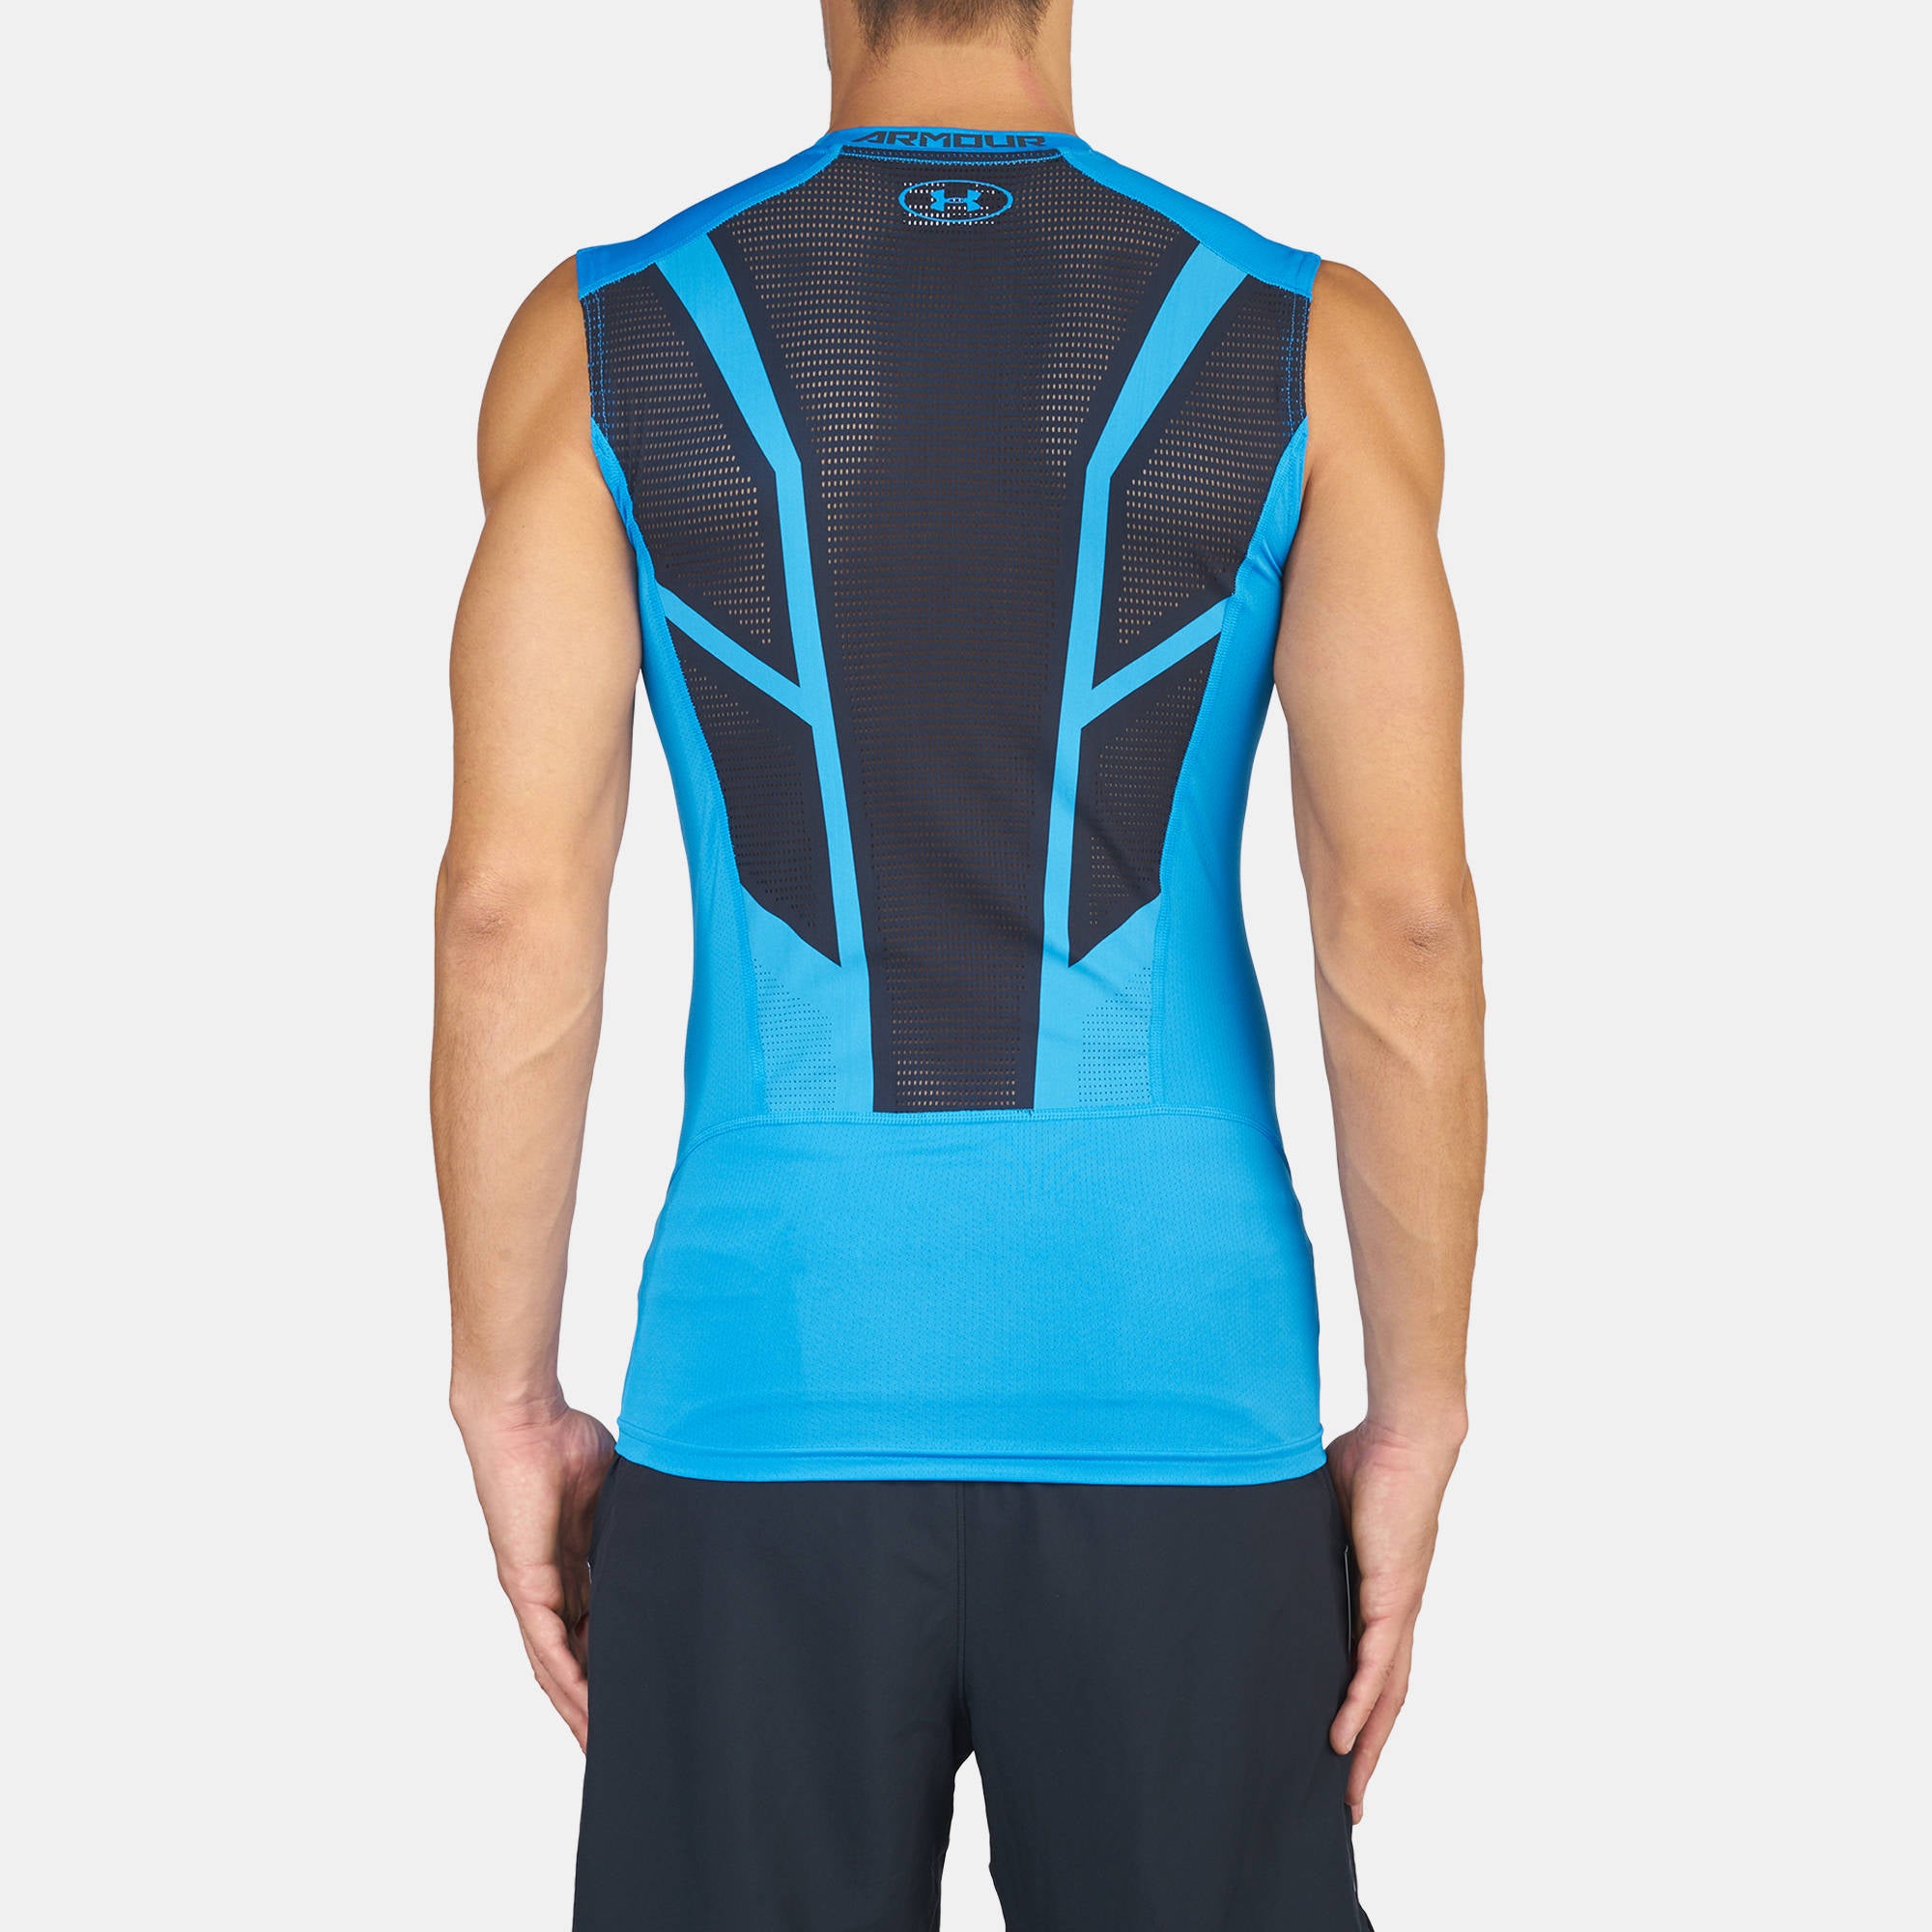 Under Armour Men's CoolSwitch Sleeveless Compression Shirt